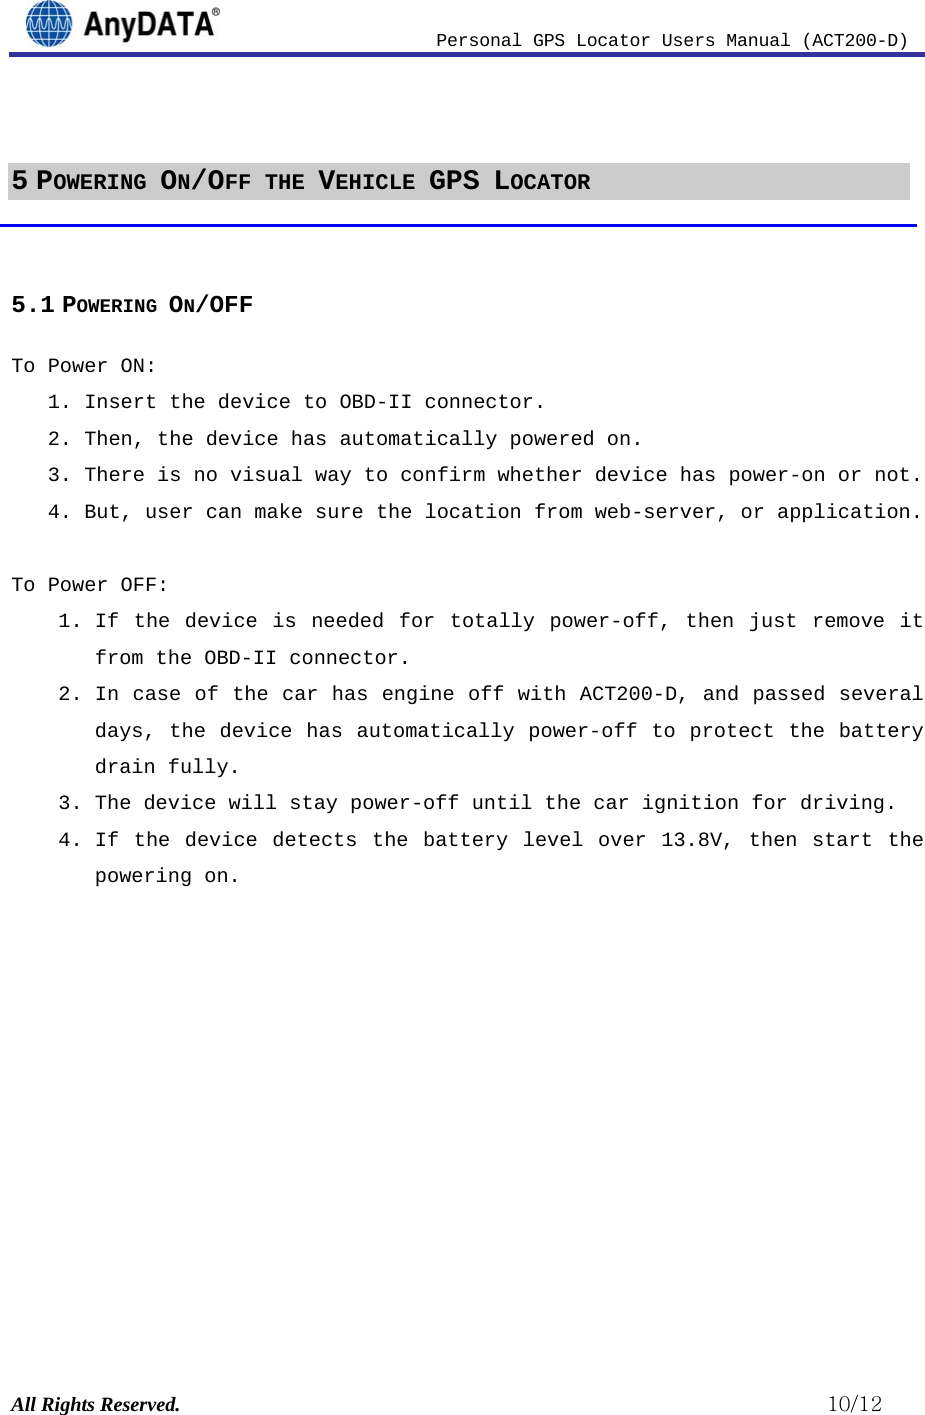                          Personal GPS Locator Users Manual (ACT200-D) All Rights Reserved.                                                          10/12  5 POWERING ON/OFF THE VEHICLE GPS LOCATOR  5.1 POWERING ON/OFF To Power ON:  1. Insert the device to OBD-II connector.  2. Then, the device has automatically powered on. 3. There is no visual way to confirm whether device has power-on or not.  4. But, user can make sure the location from web-server, or application.  To Power OFF: 1. If the device is needed for totally power-off, then just remove it from the OBD-II connector. 2. In case of the car has engine off with ACT200-D, and passed several days, the device has automatically power-off to protect the battery drain fully.  3. The device will stay power-off until the car ignition for driving.  4. If the device detects the battery level over 13.8V, then start the powering on.             